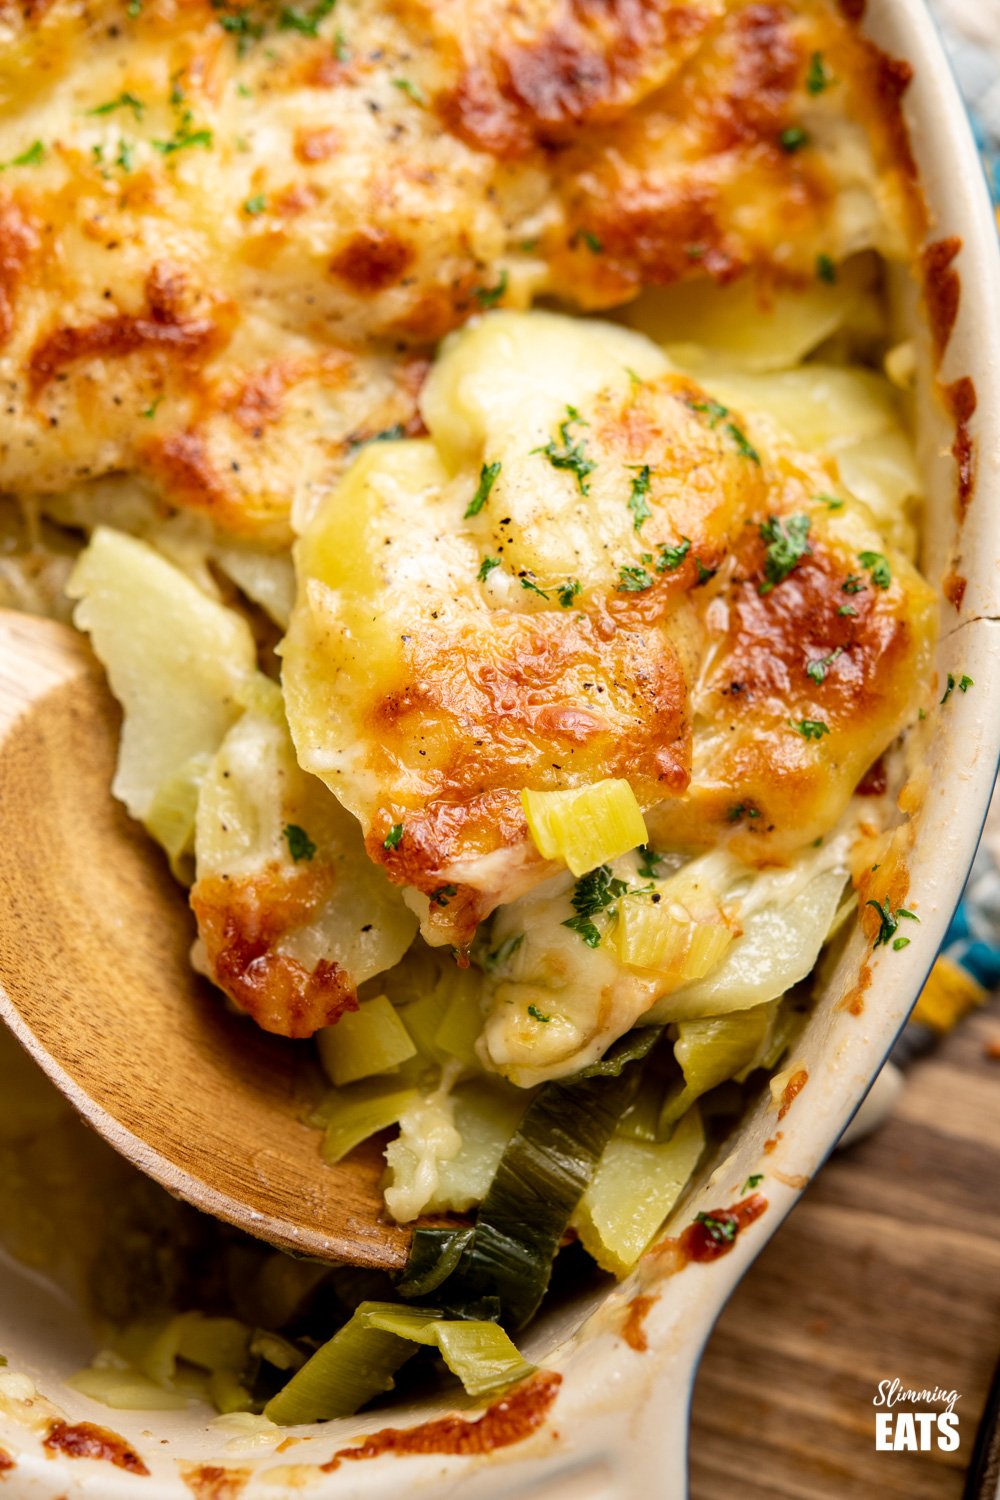 wooden spoon dishing up leek and potato bake from oval baking dish